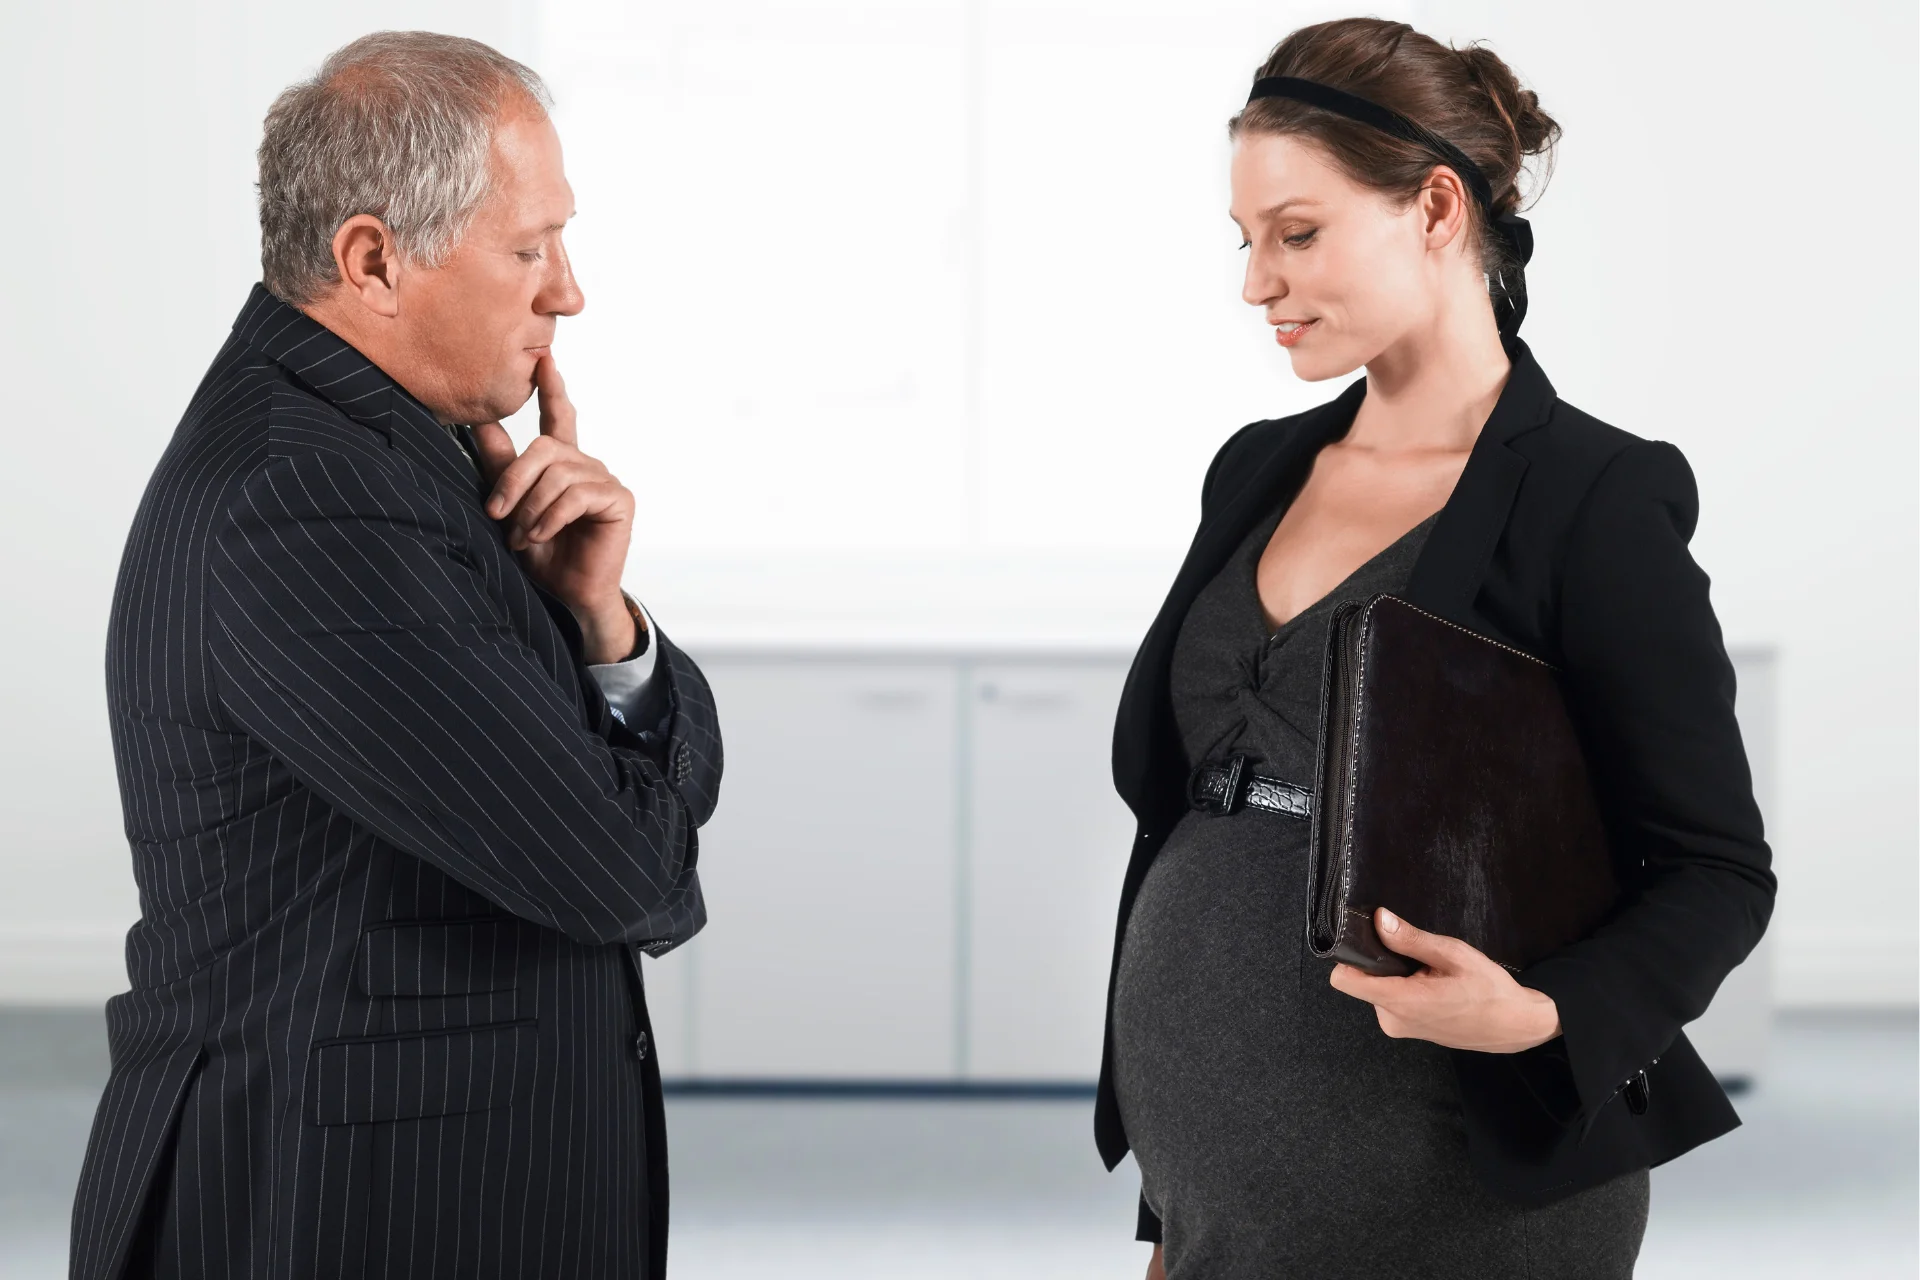 Male boss discriminating pregnant woman at work